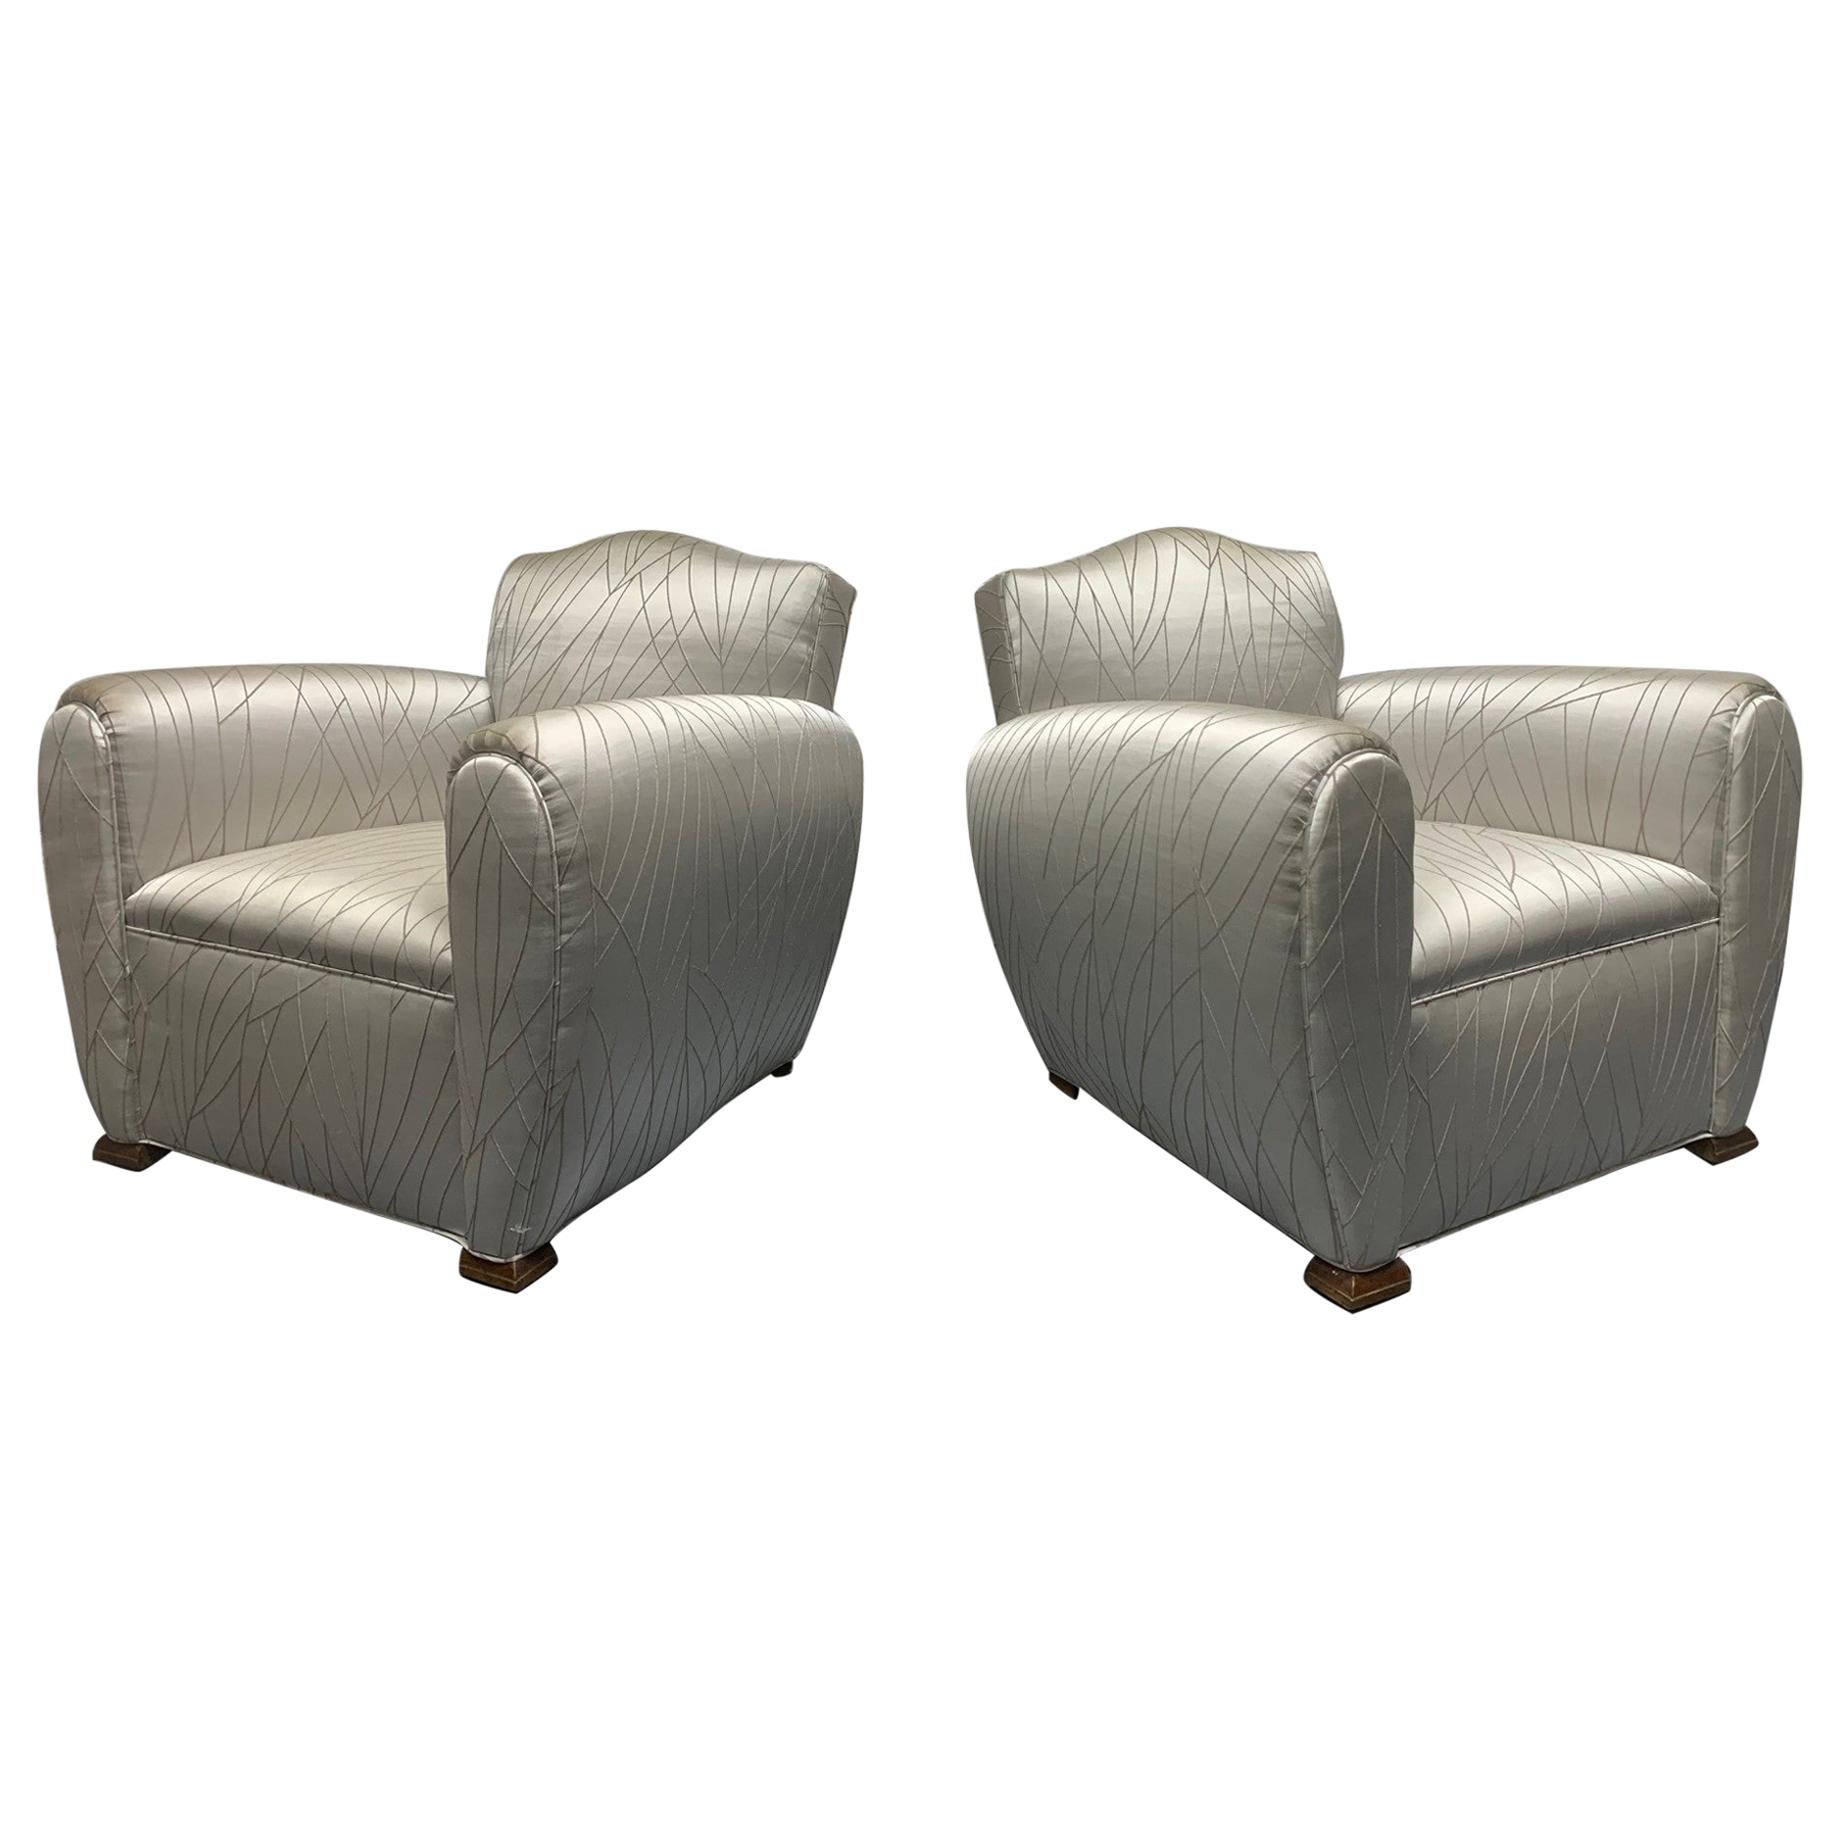 Pair of 1940s Art Deco Club Chairs